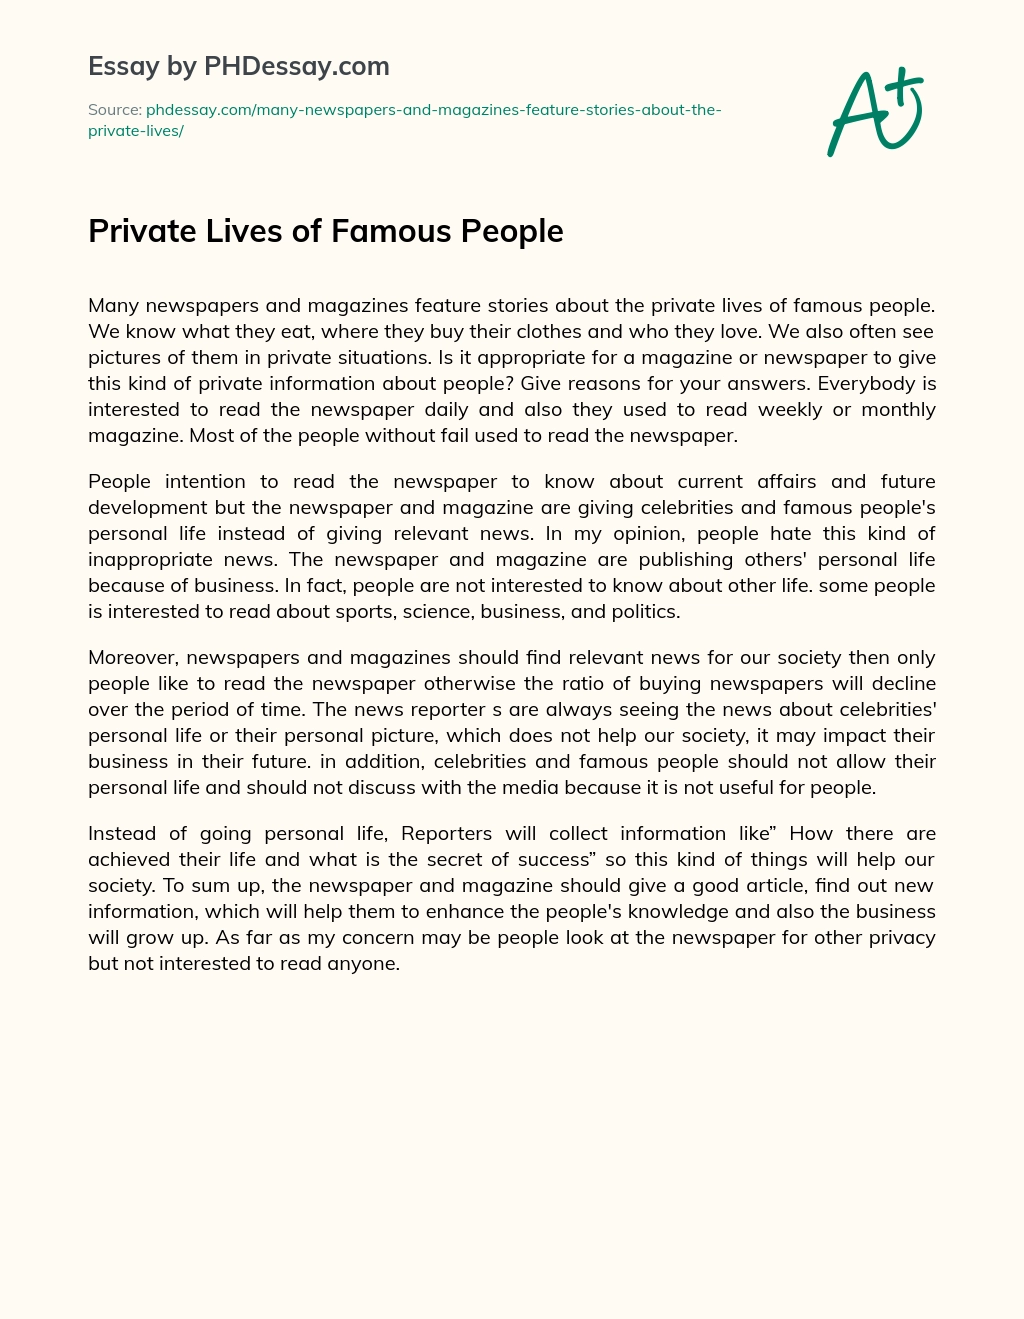 Private Lives of Famous People essay